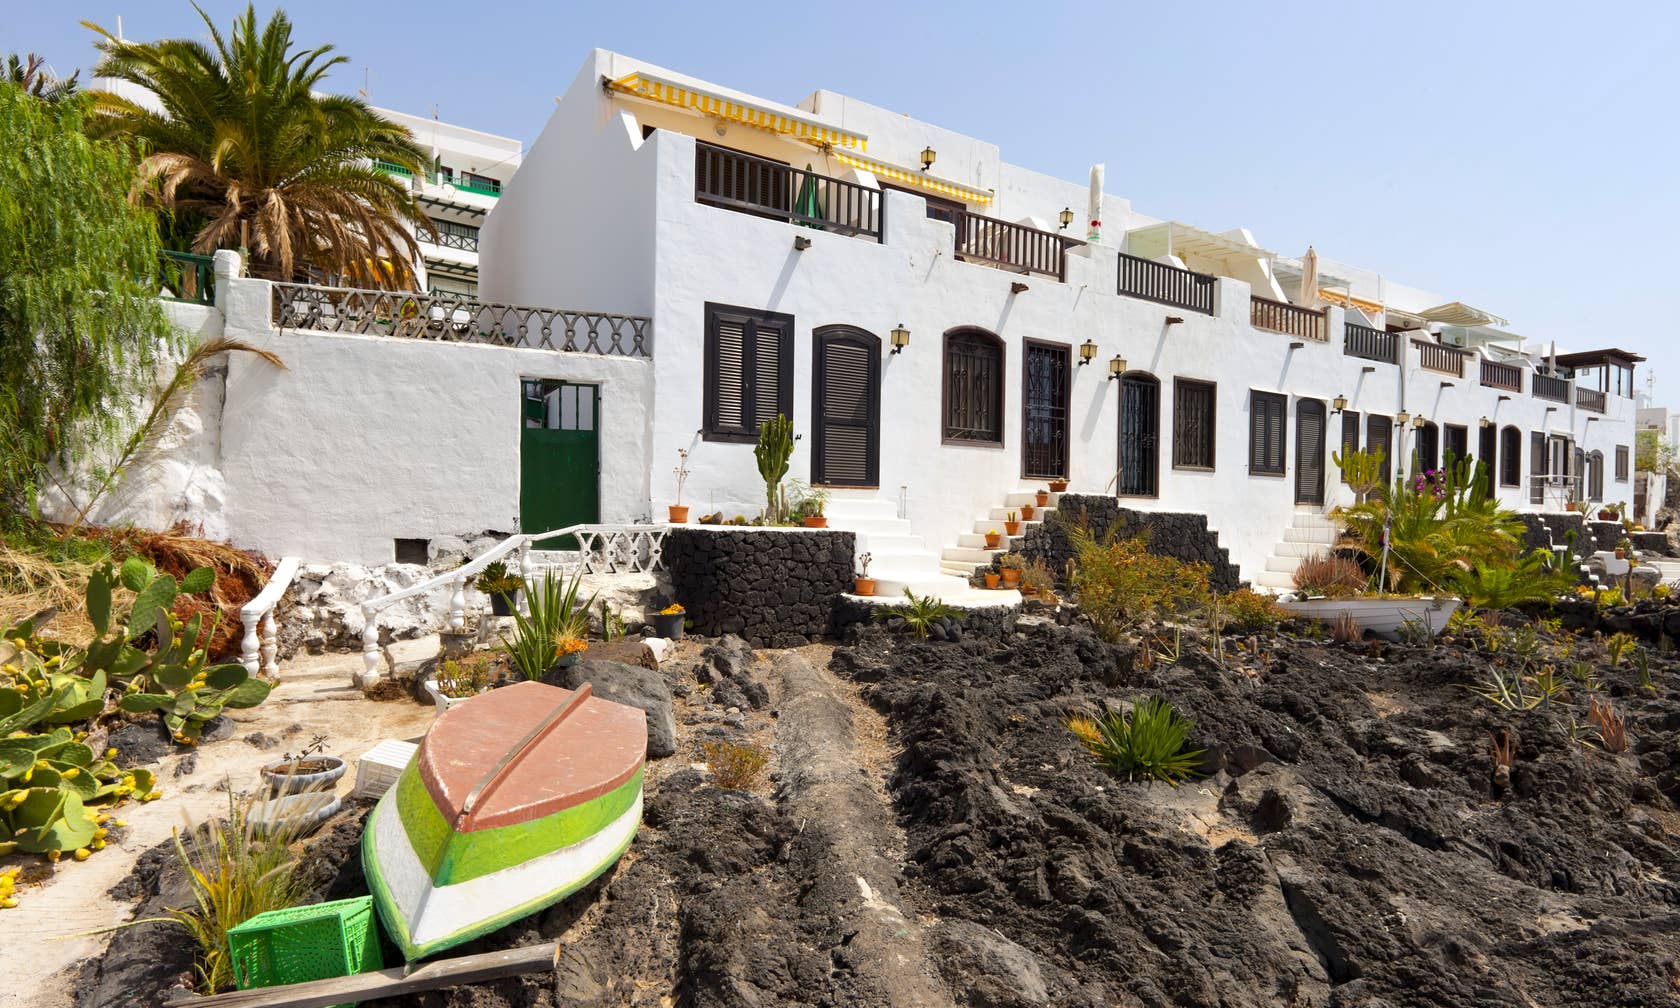 Places to stay in Puerto del Carmen